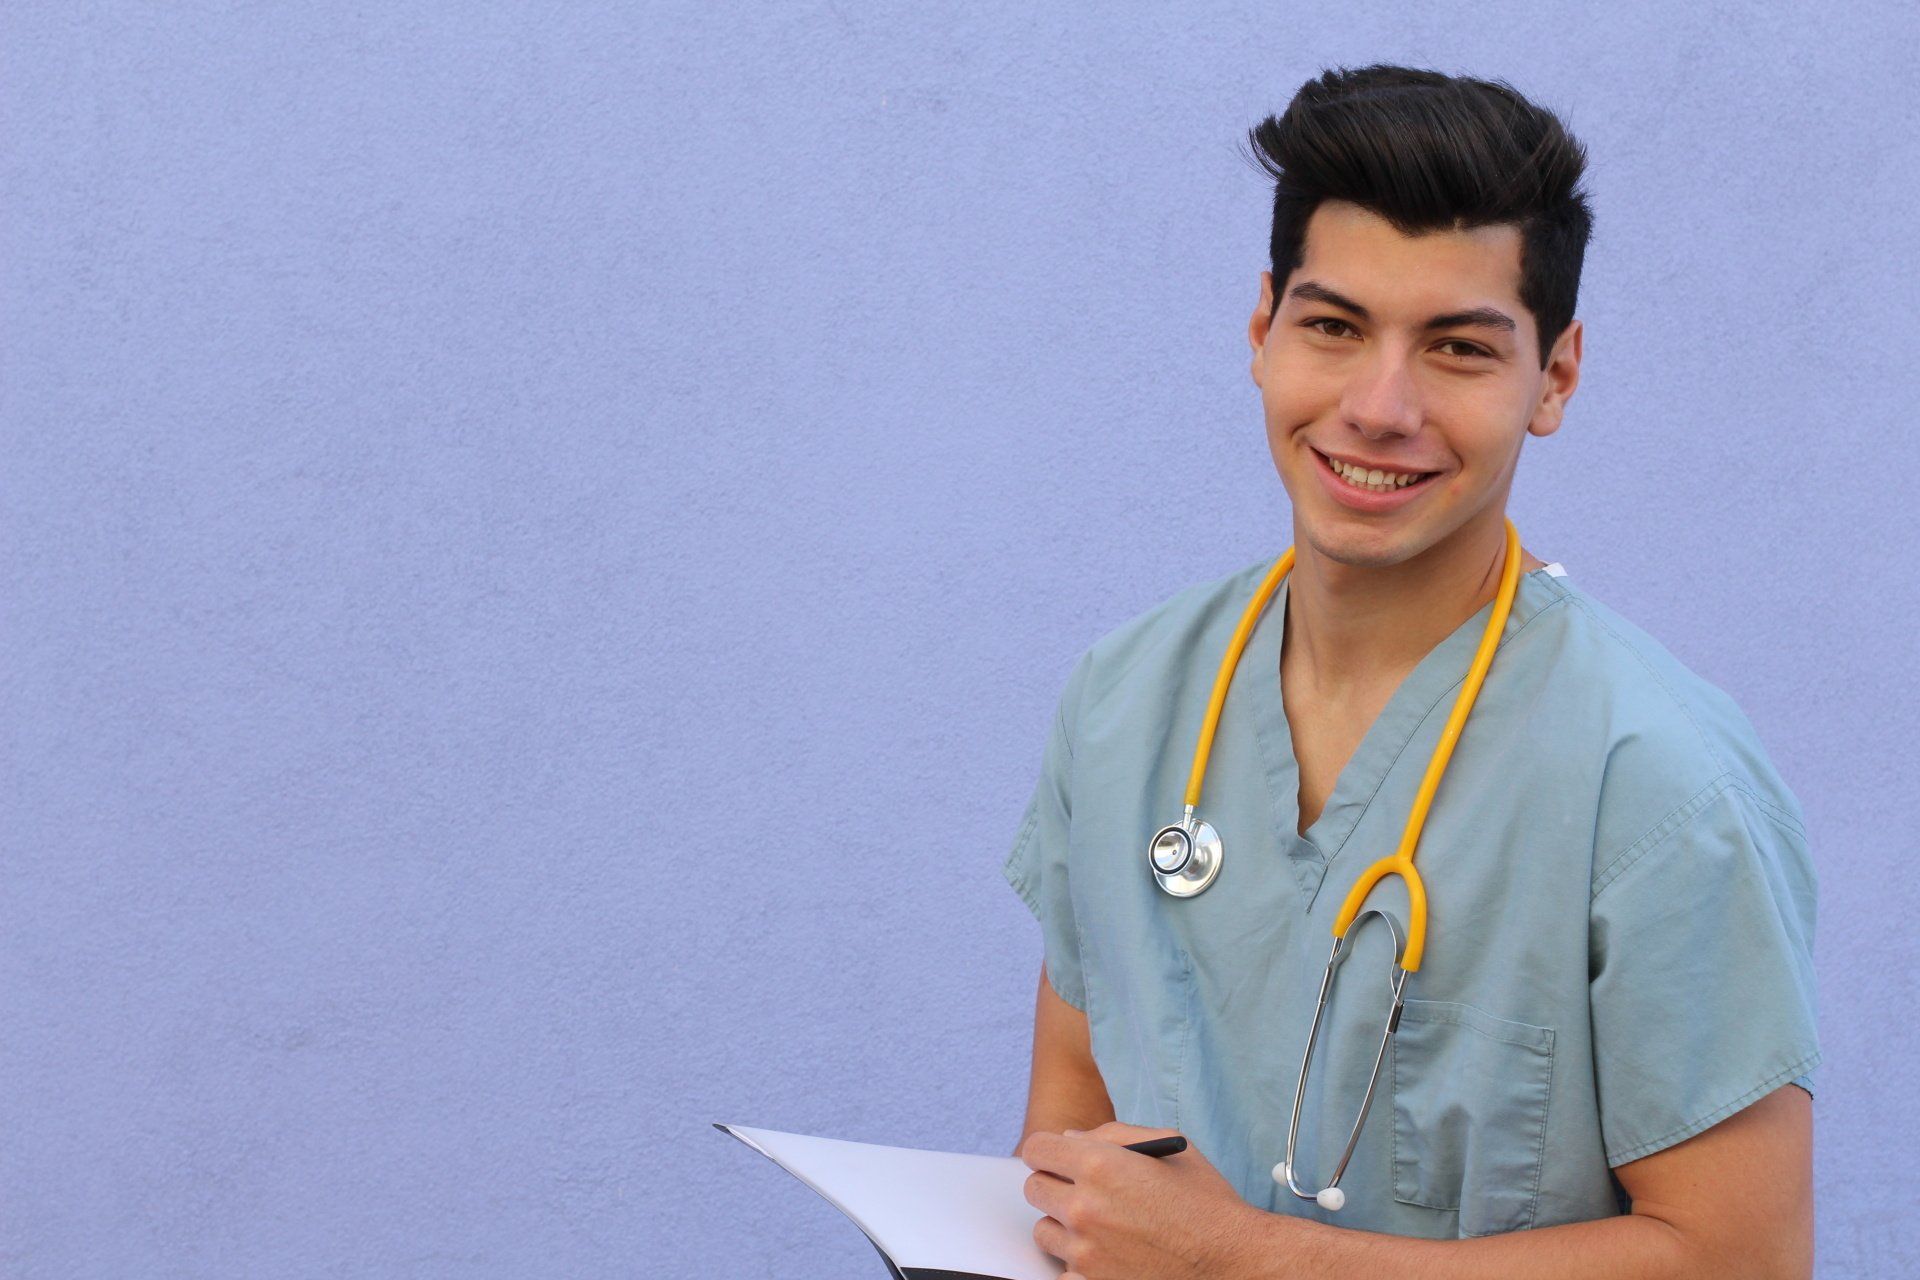 A BLS Provider, a young man wearing scrubs and a stethoscope is holding a clipboard and smiling .